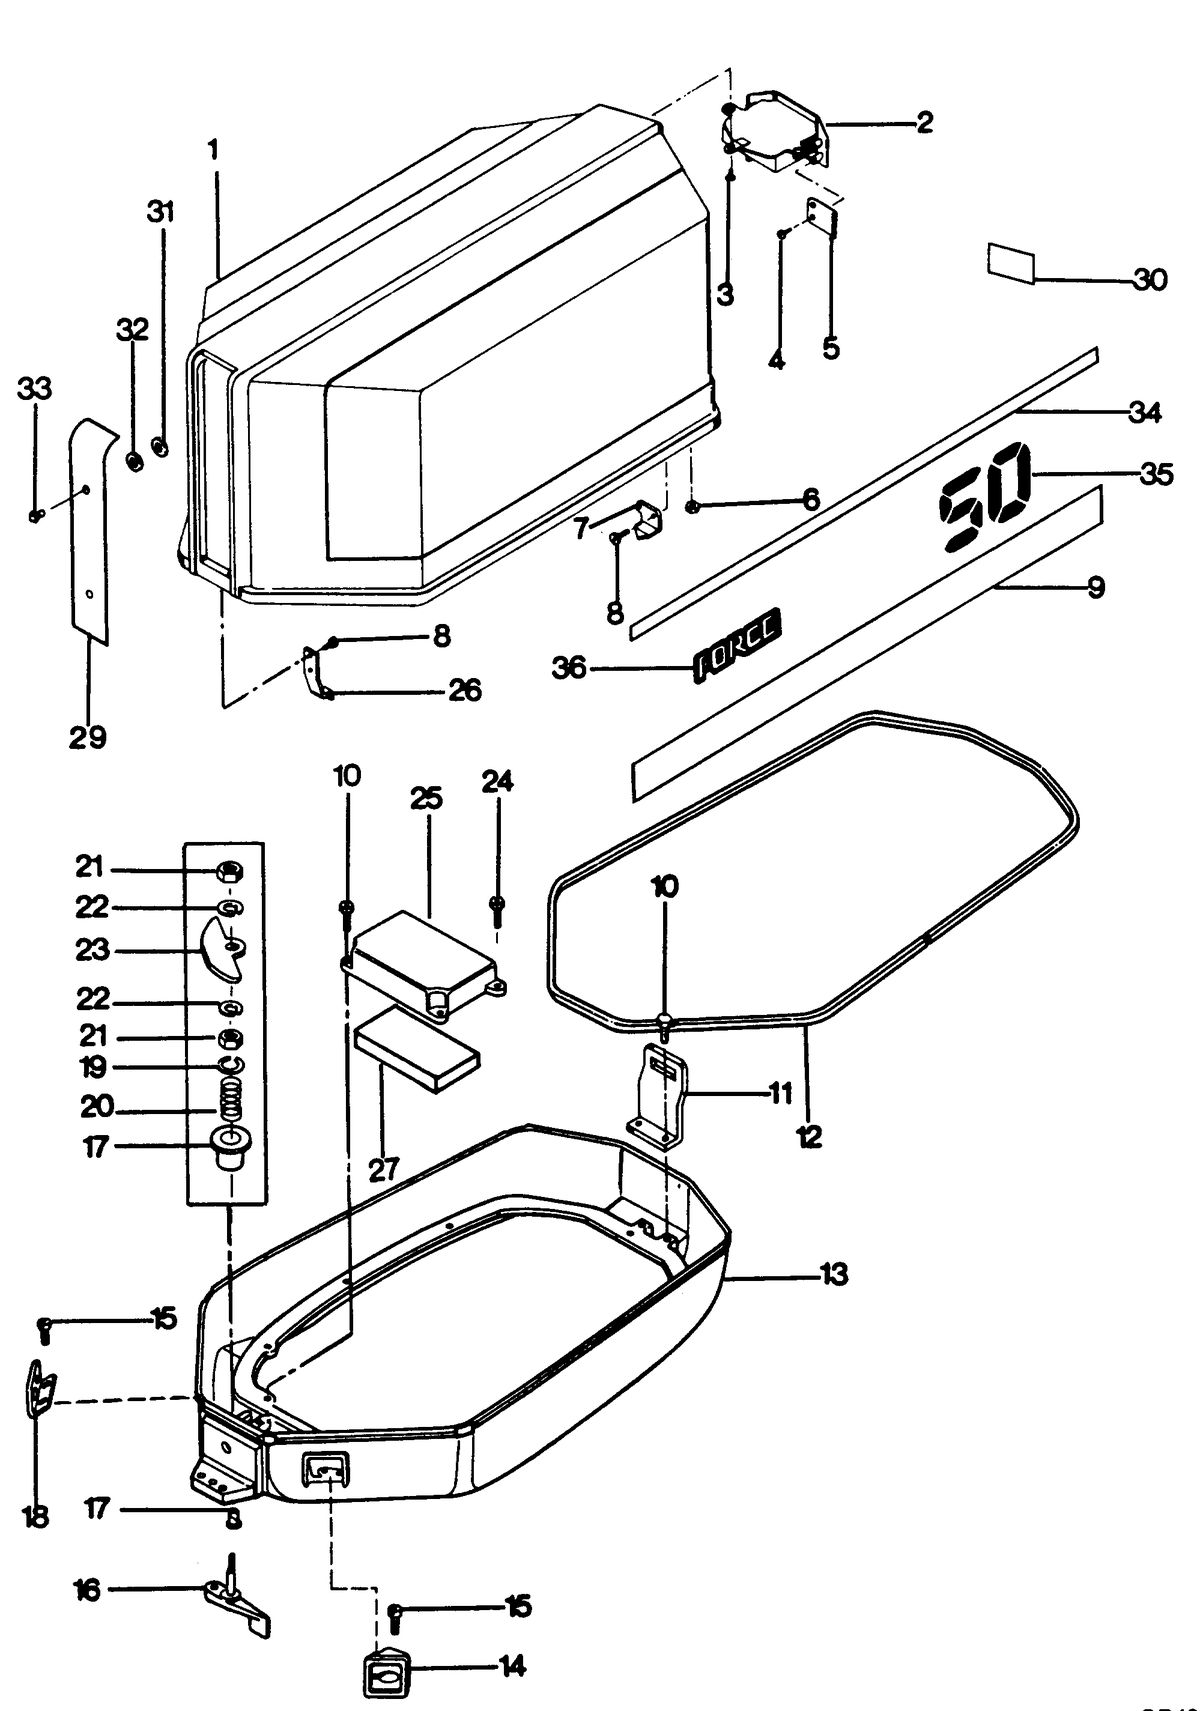 FORCE FORCE 1987 50 H.P. ENGINE COVER AND SUPPORT PLATE